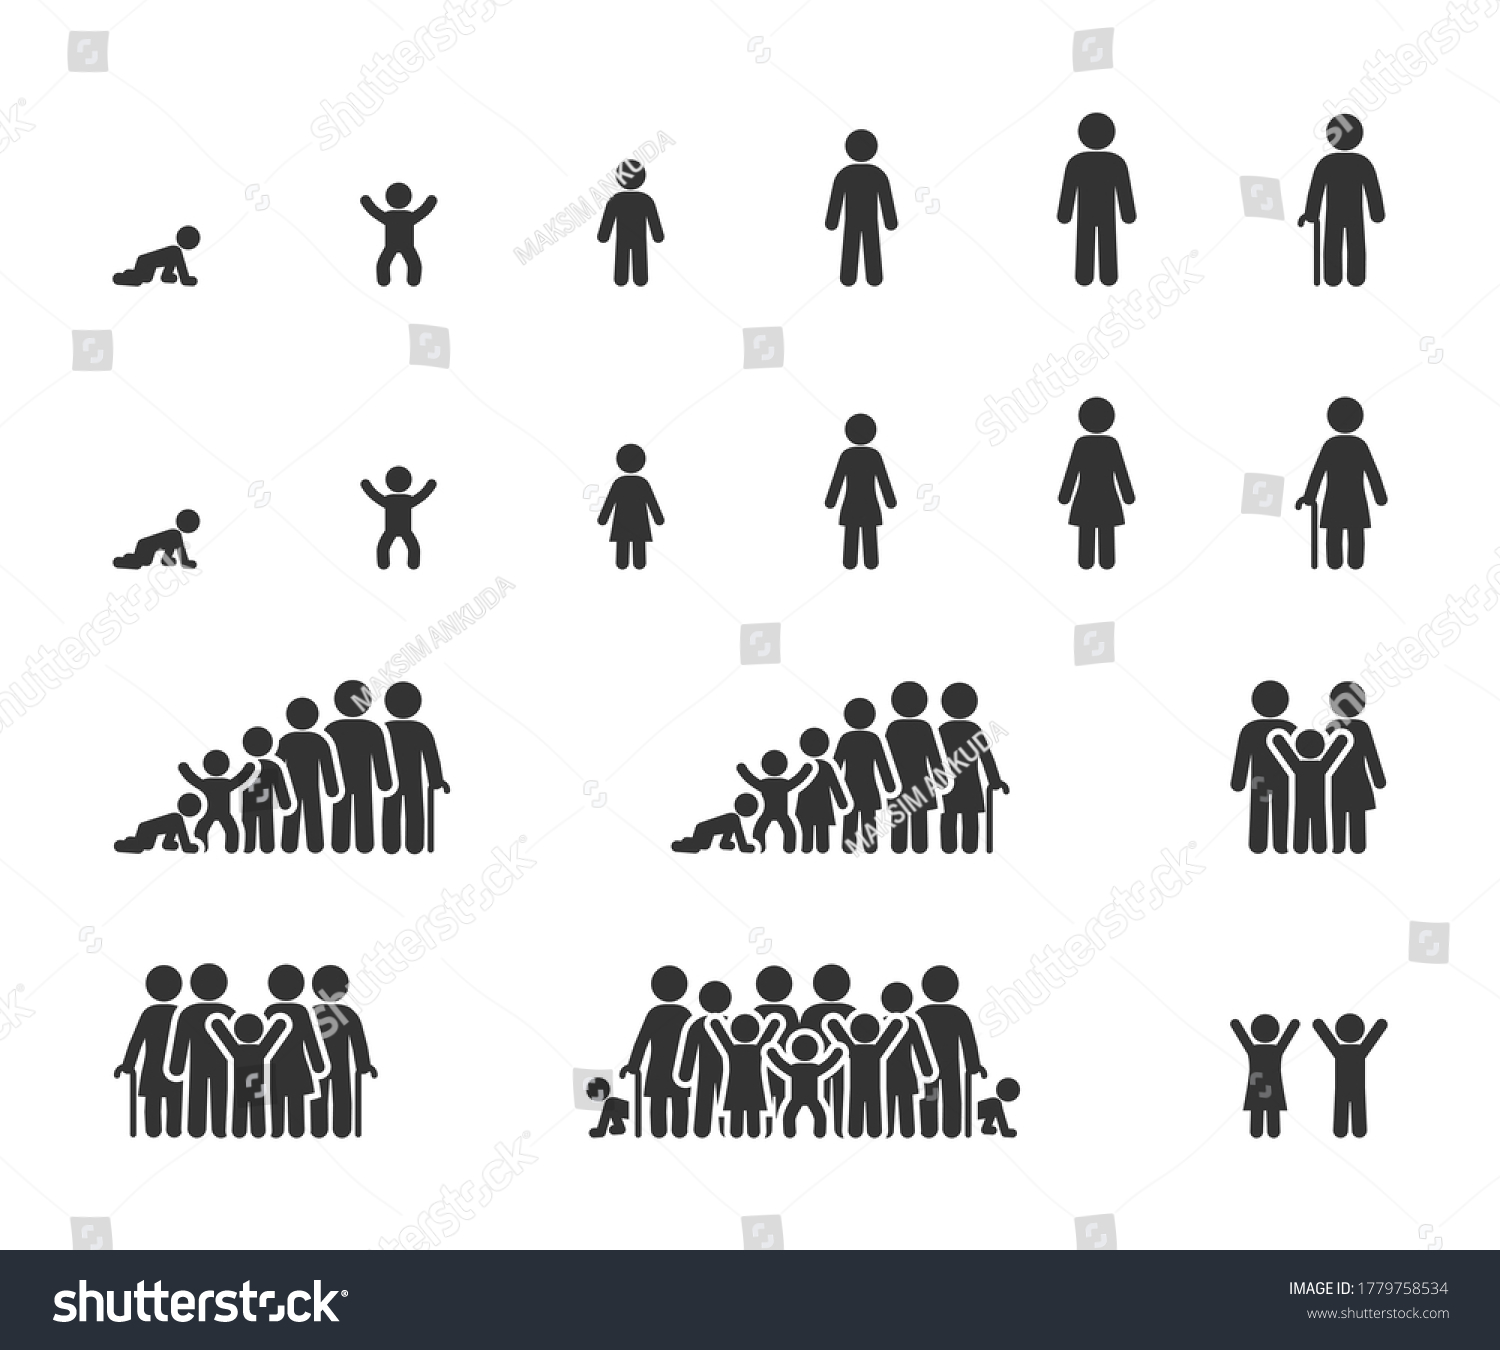 SVG of Vector set of life cycle flat icons. People of different ages, man and women, family, stages of growing up. svg